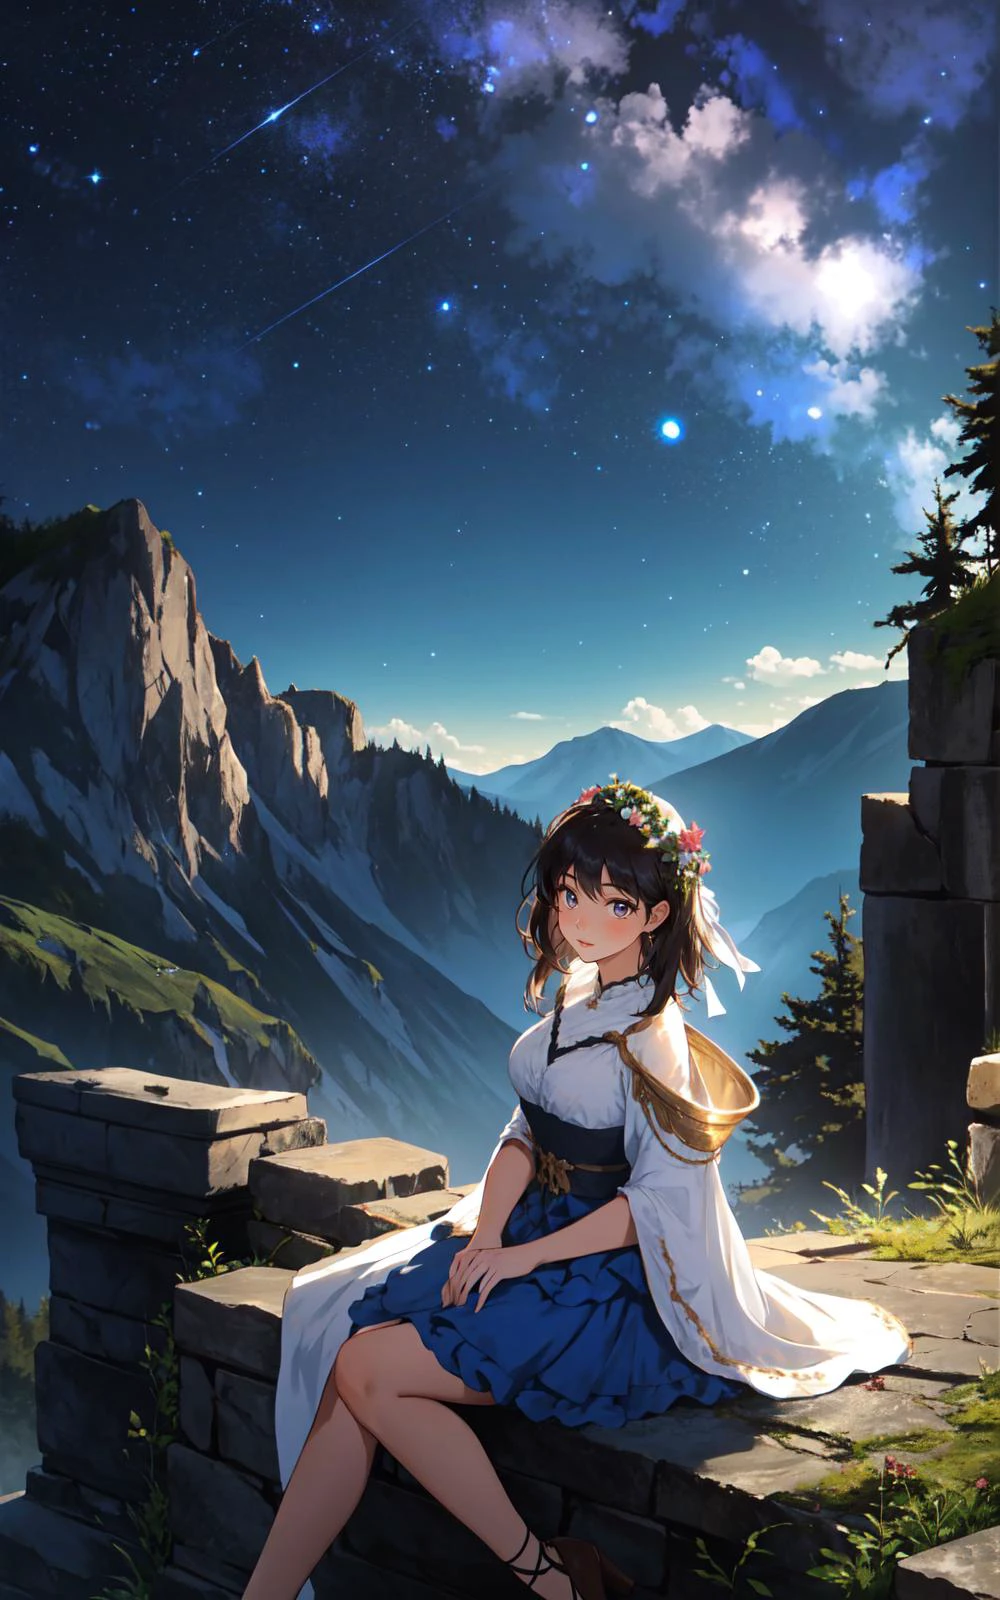 (Layered Depth, Parallax Effect, Soft focus foreground:1.3) (1girl, perfect seductive young woman Discovering an Ancient Artifact Atop a Mountain:1.3) mystical artifact on a mountaintop, surrounded by ancient ruins, under a canopy of stars, the artifact glowing with an otherworldly light.